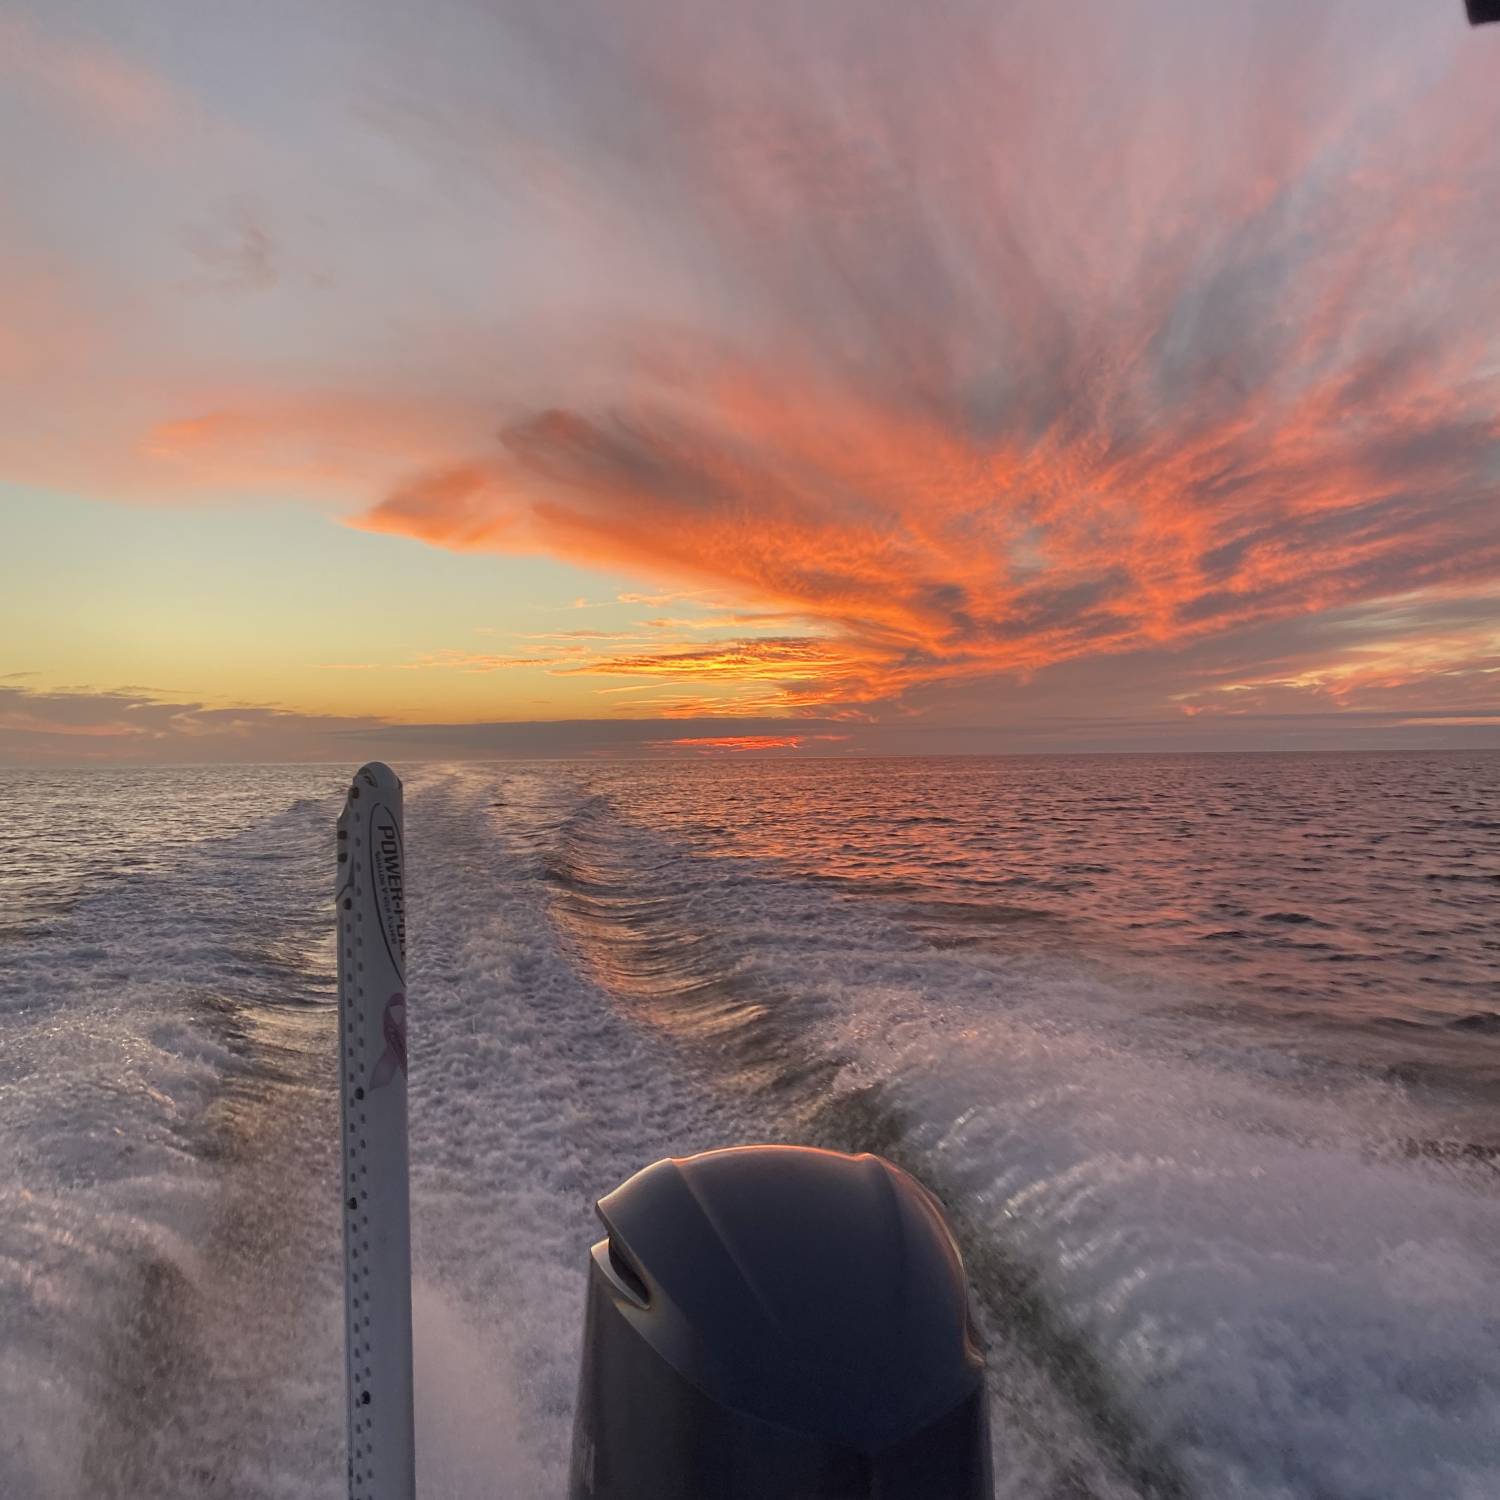 Fire on the horizon!! Sun setting on a great day fishing heading to the dock rolling comfortabl...